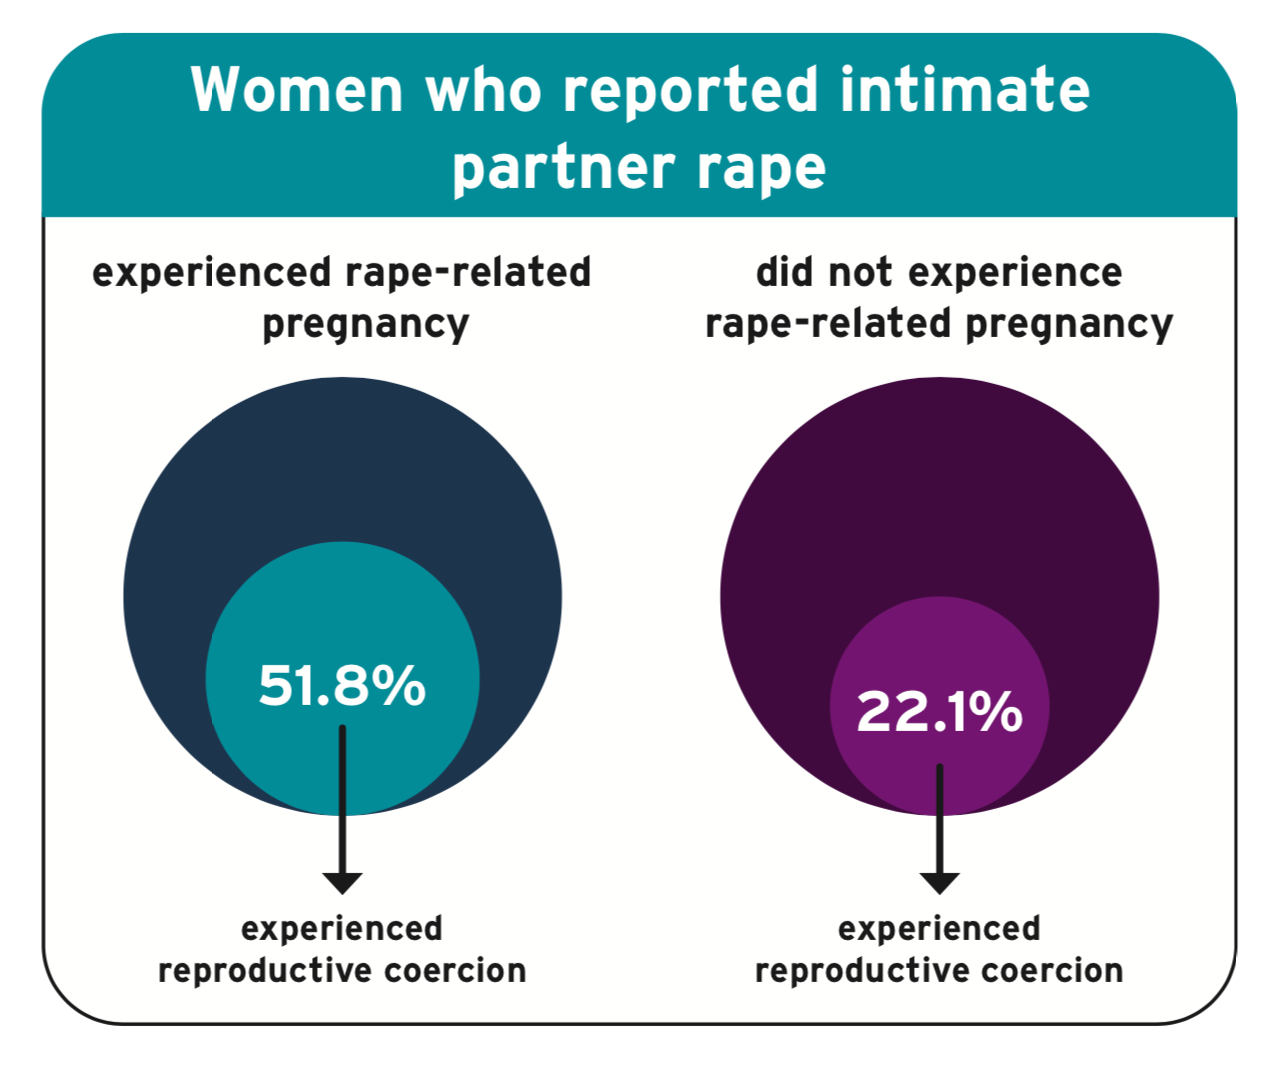 Title: Women who reported intimate partner rape. Experienced rape-related pregnancy: 51.8% experienced reproductive coercion. Did not experience rape-related pregnancy: 22.1% experienced reproductive coercion